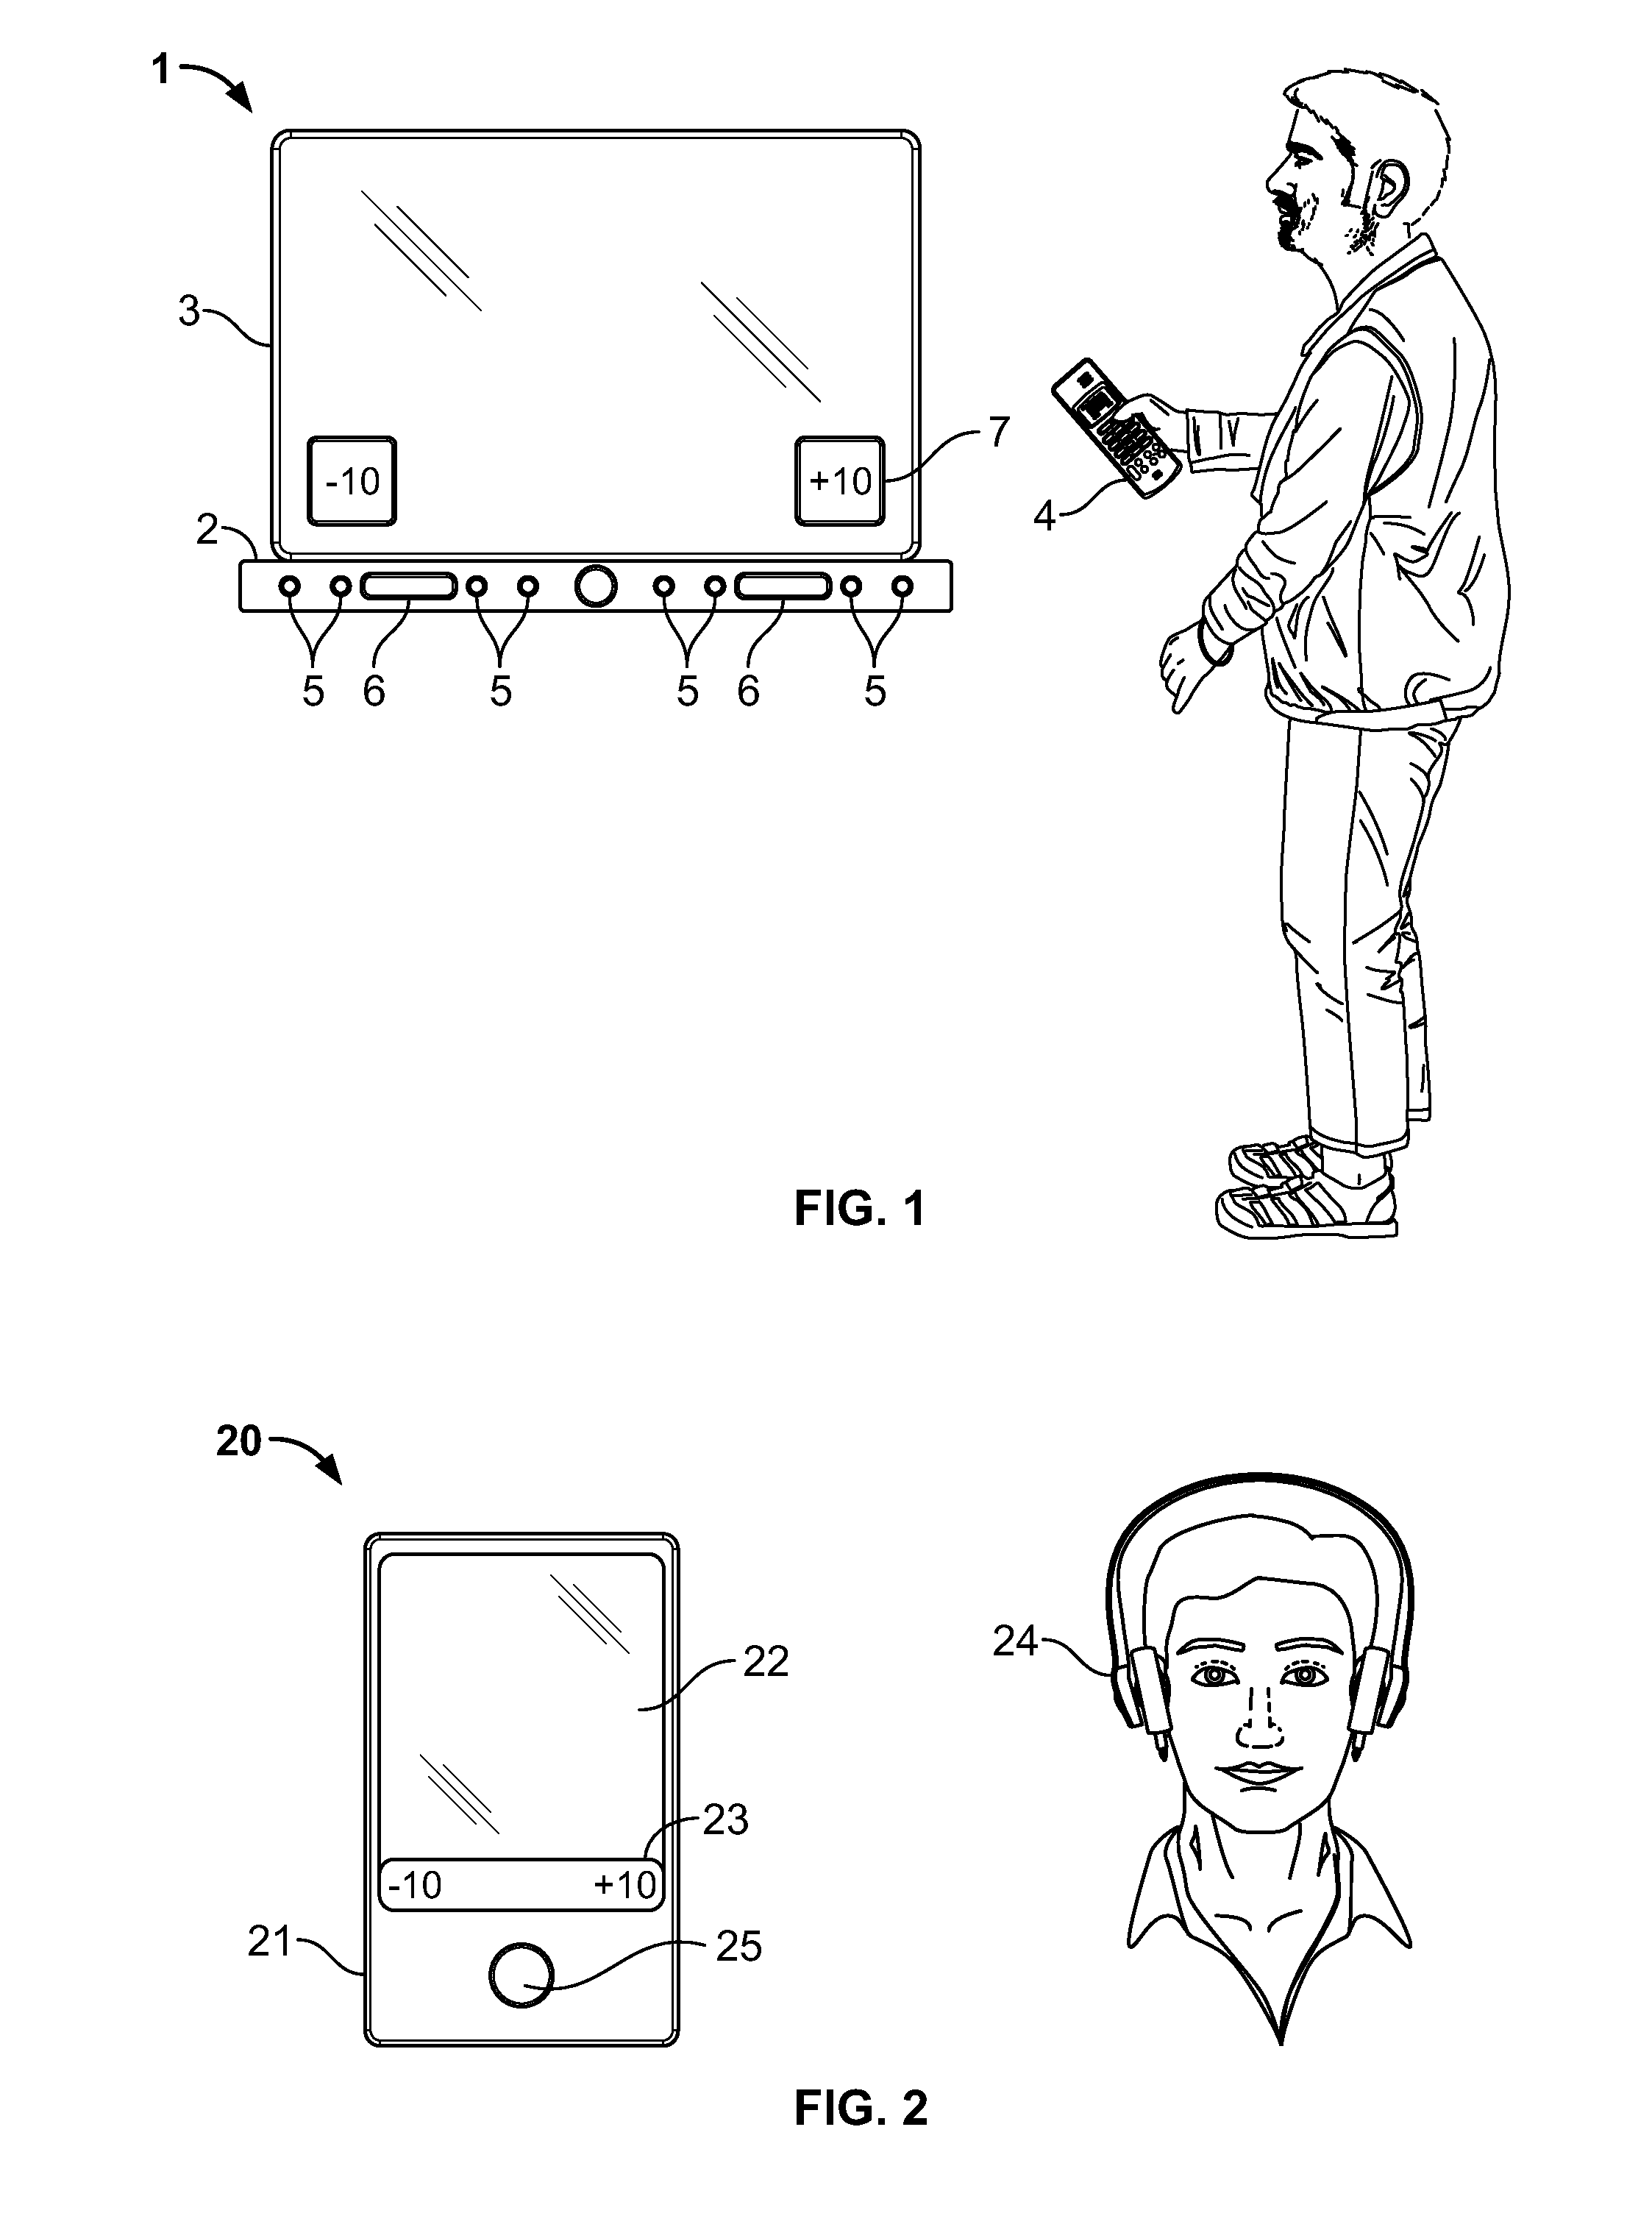 Acoustic surround immersion control system and method